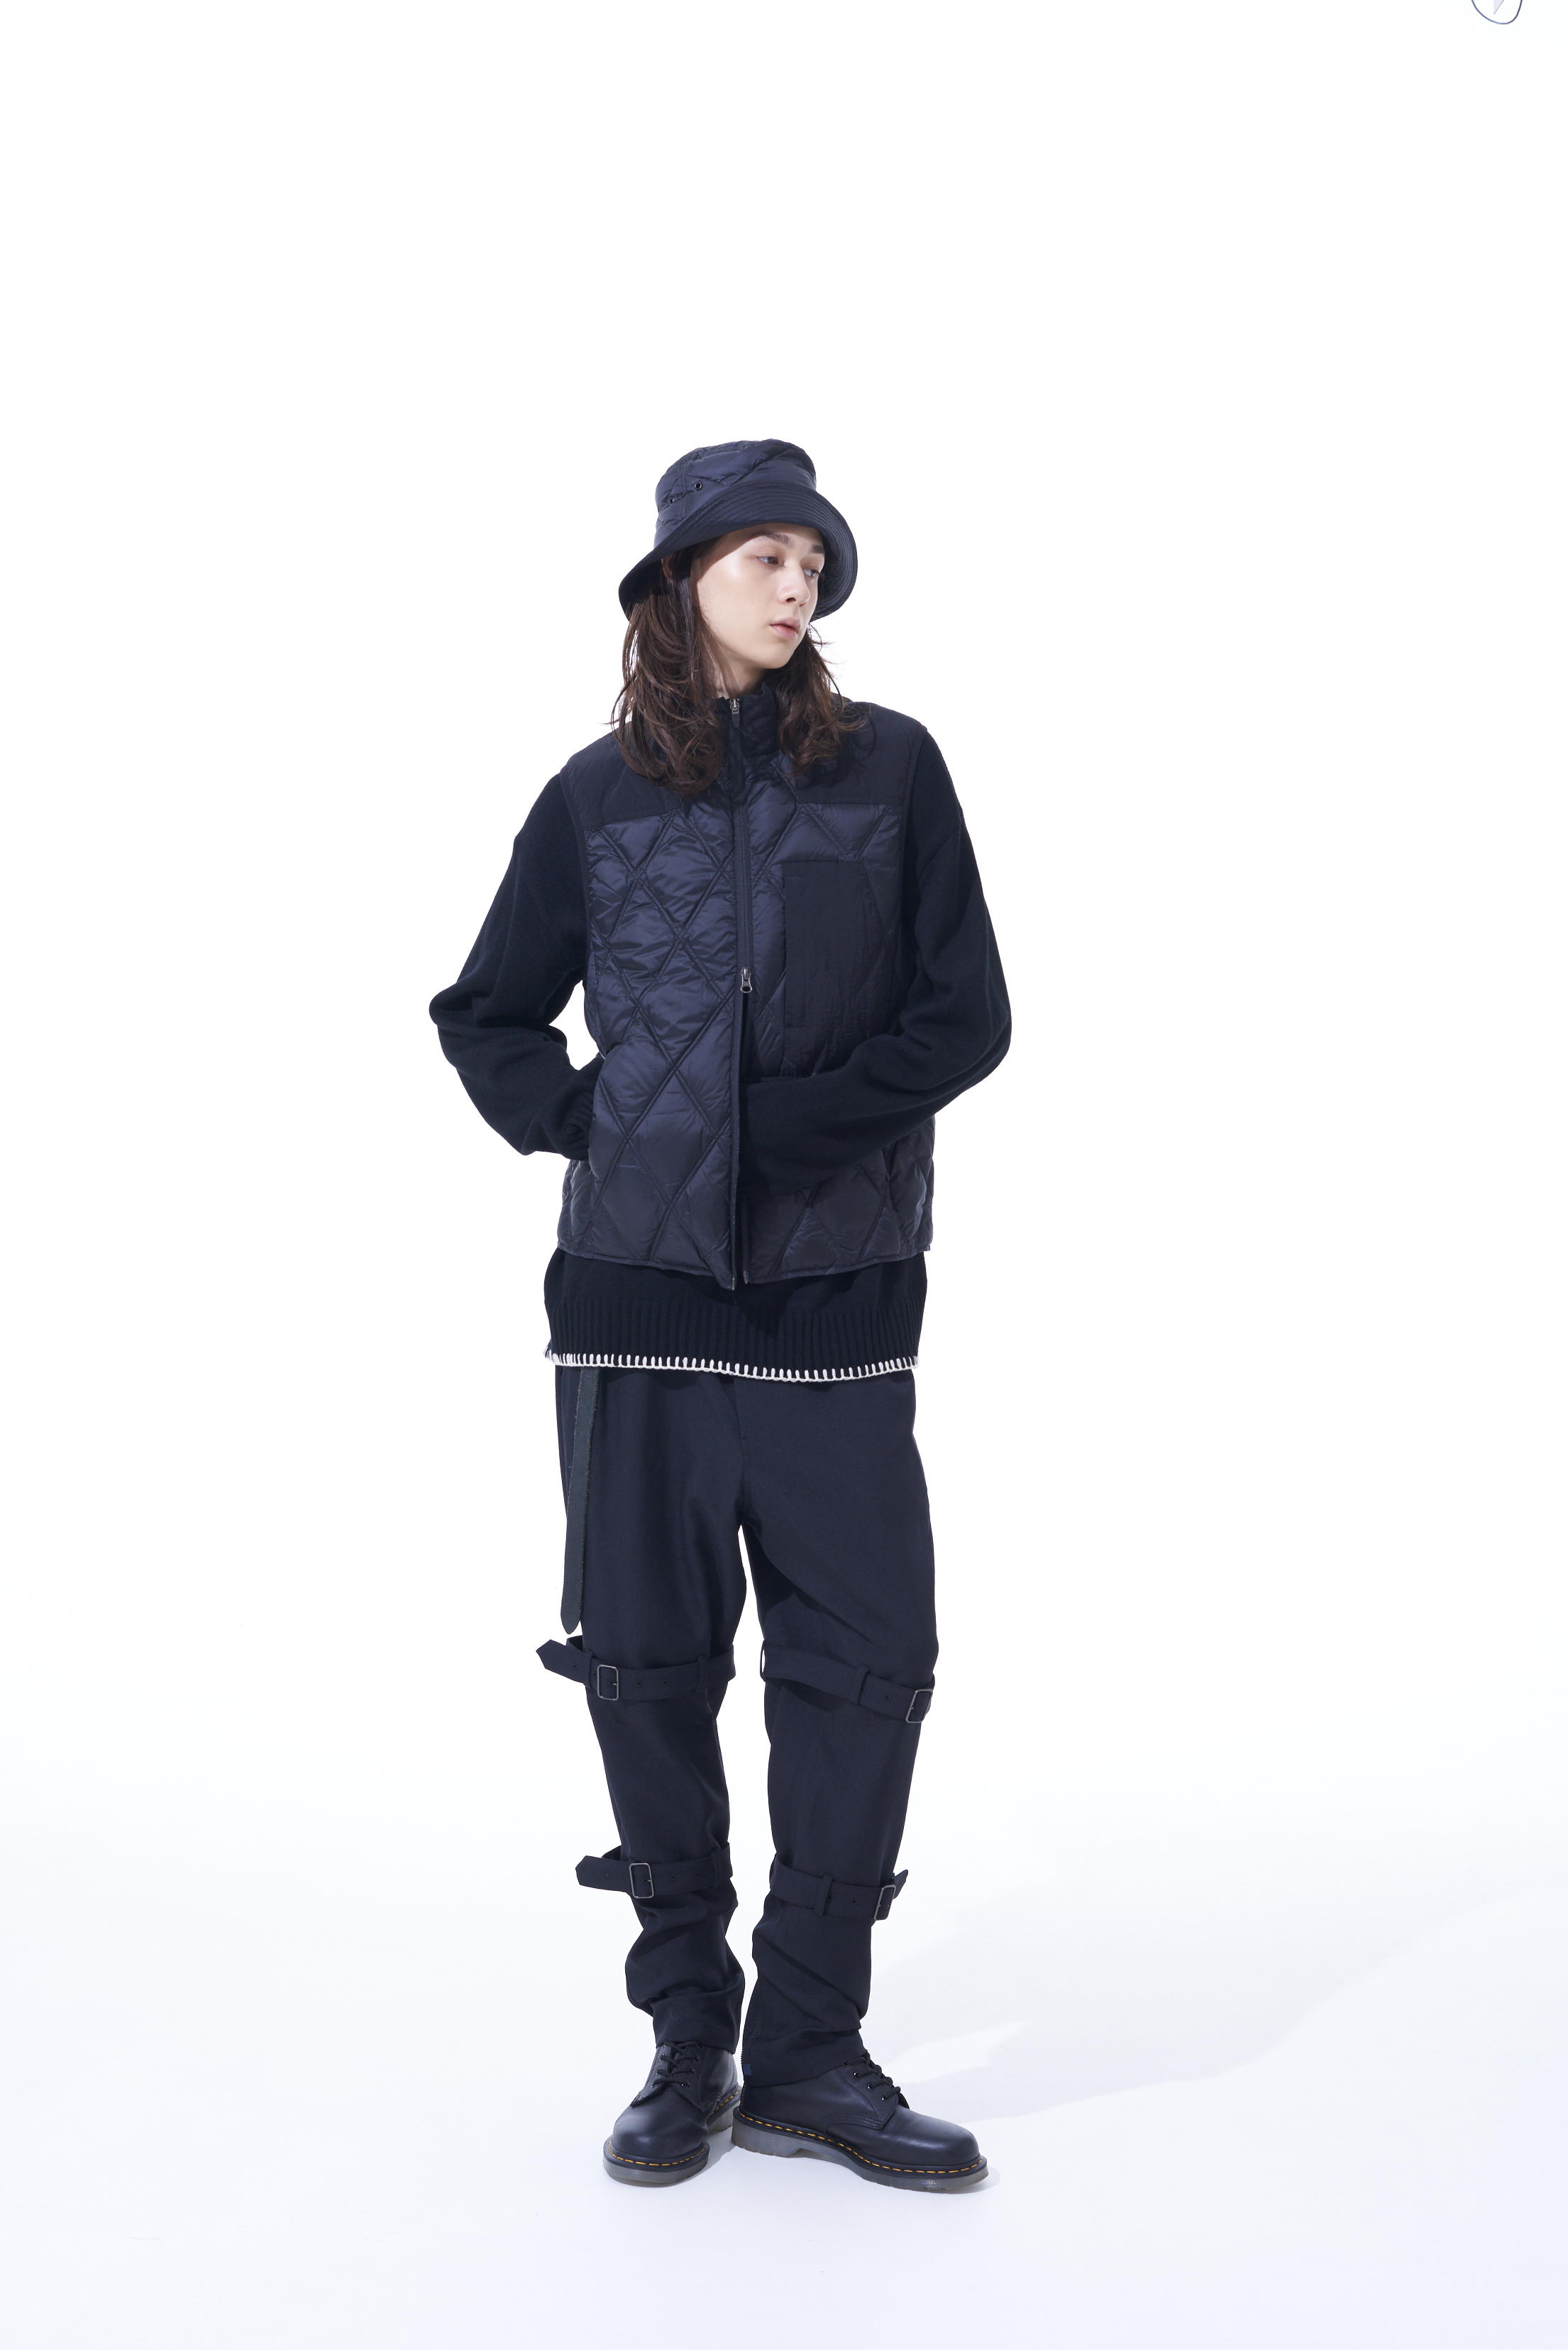 【S'YTE x TAION】Collaboration Collection QUILTED DOWN VEST